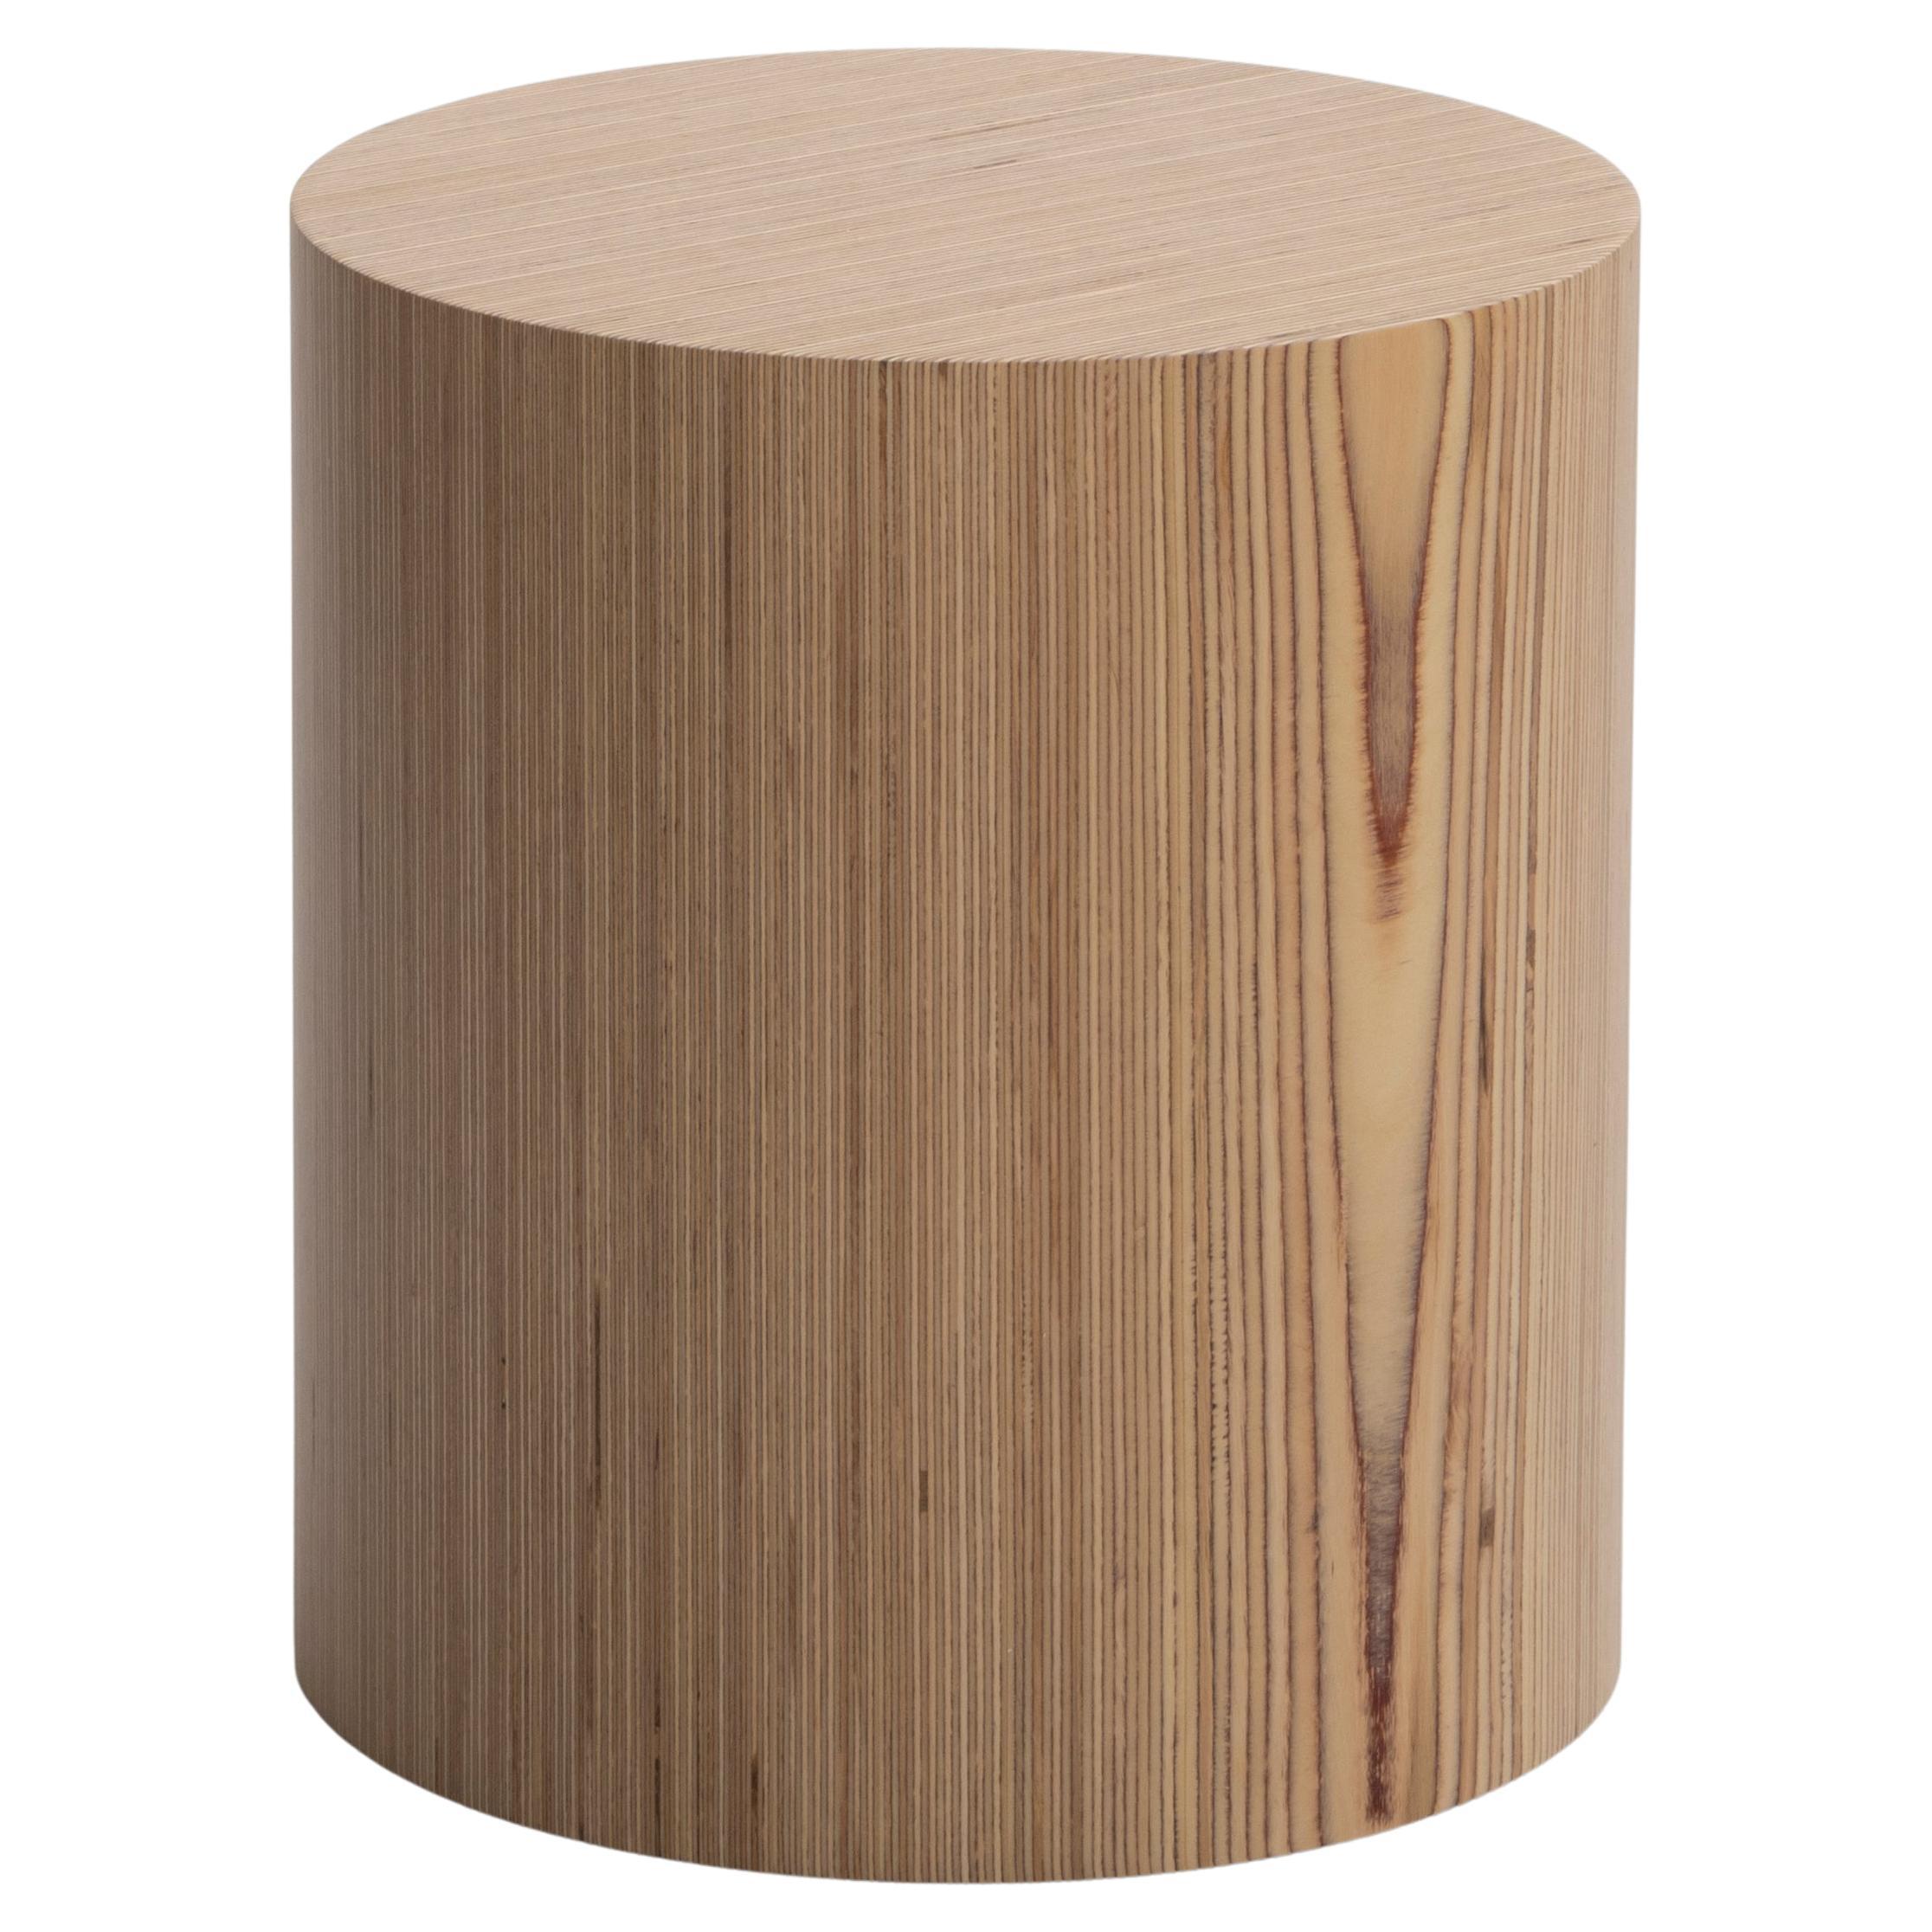 Stack Vert Stool by Timbur, Represented by Tuleste Factory For Sale